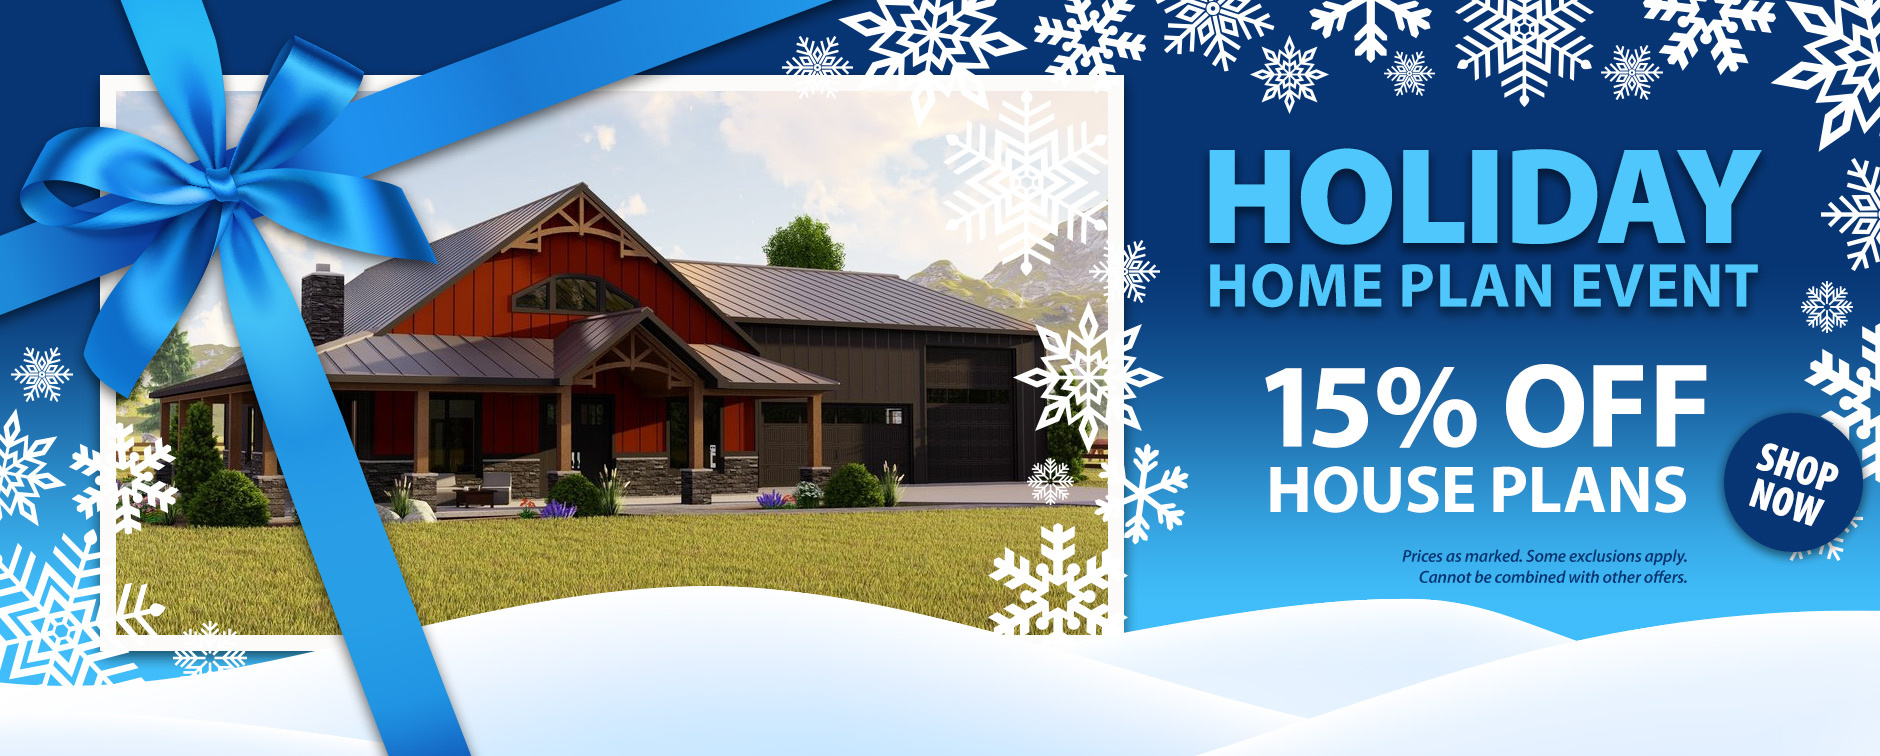 Holiday Event: Take 15% Off House Plans - No Code Needed.